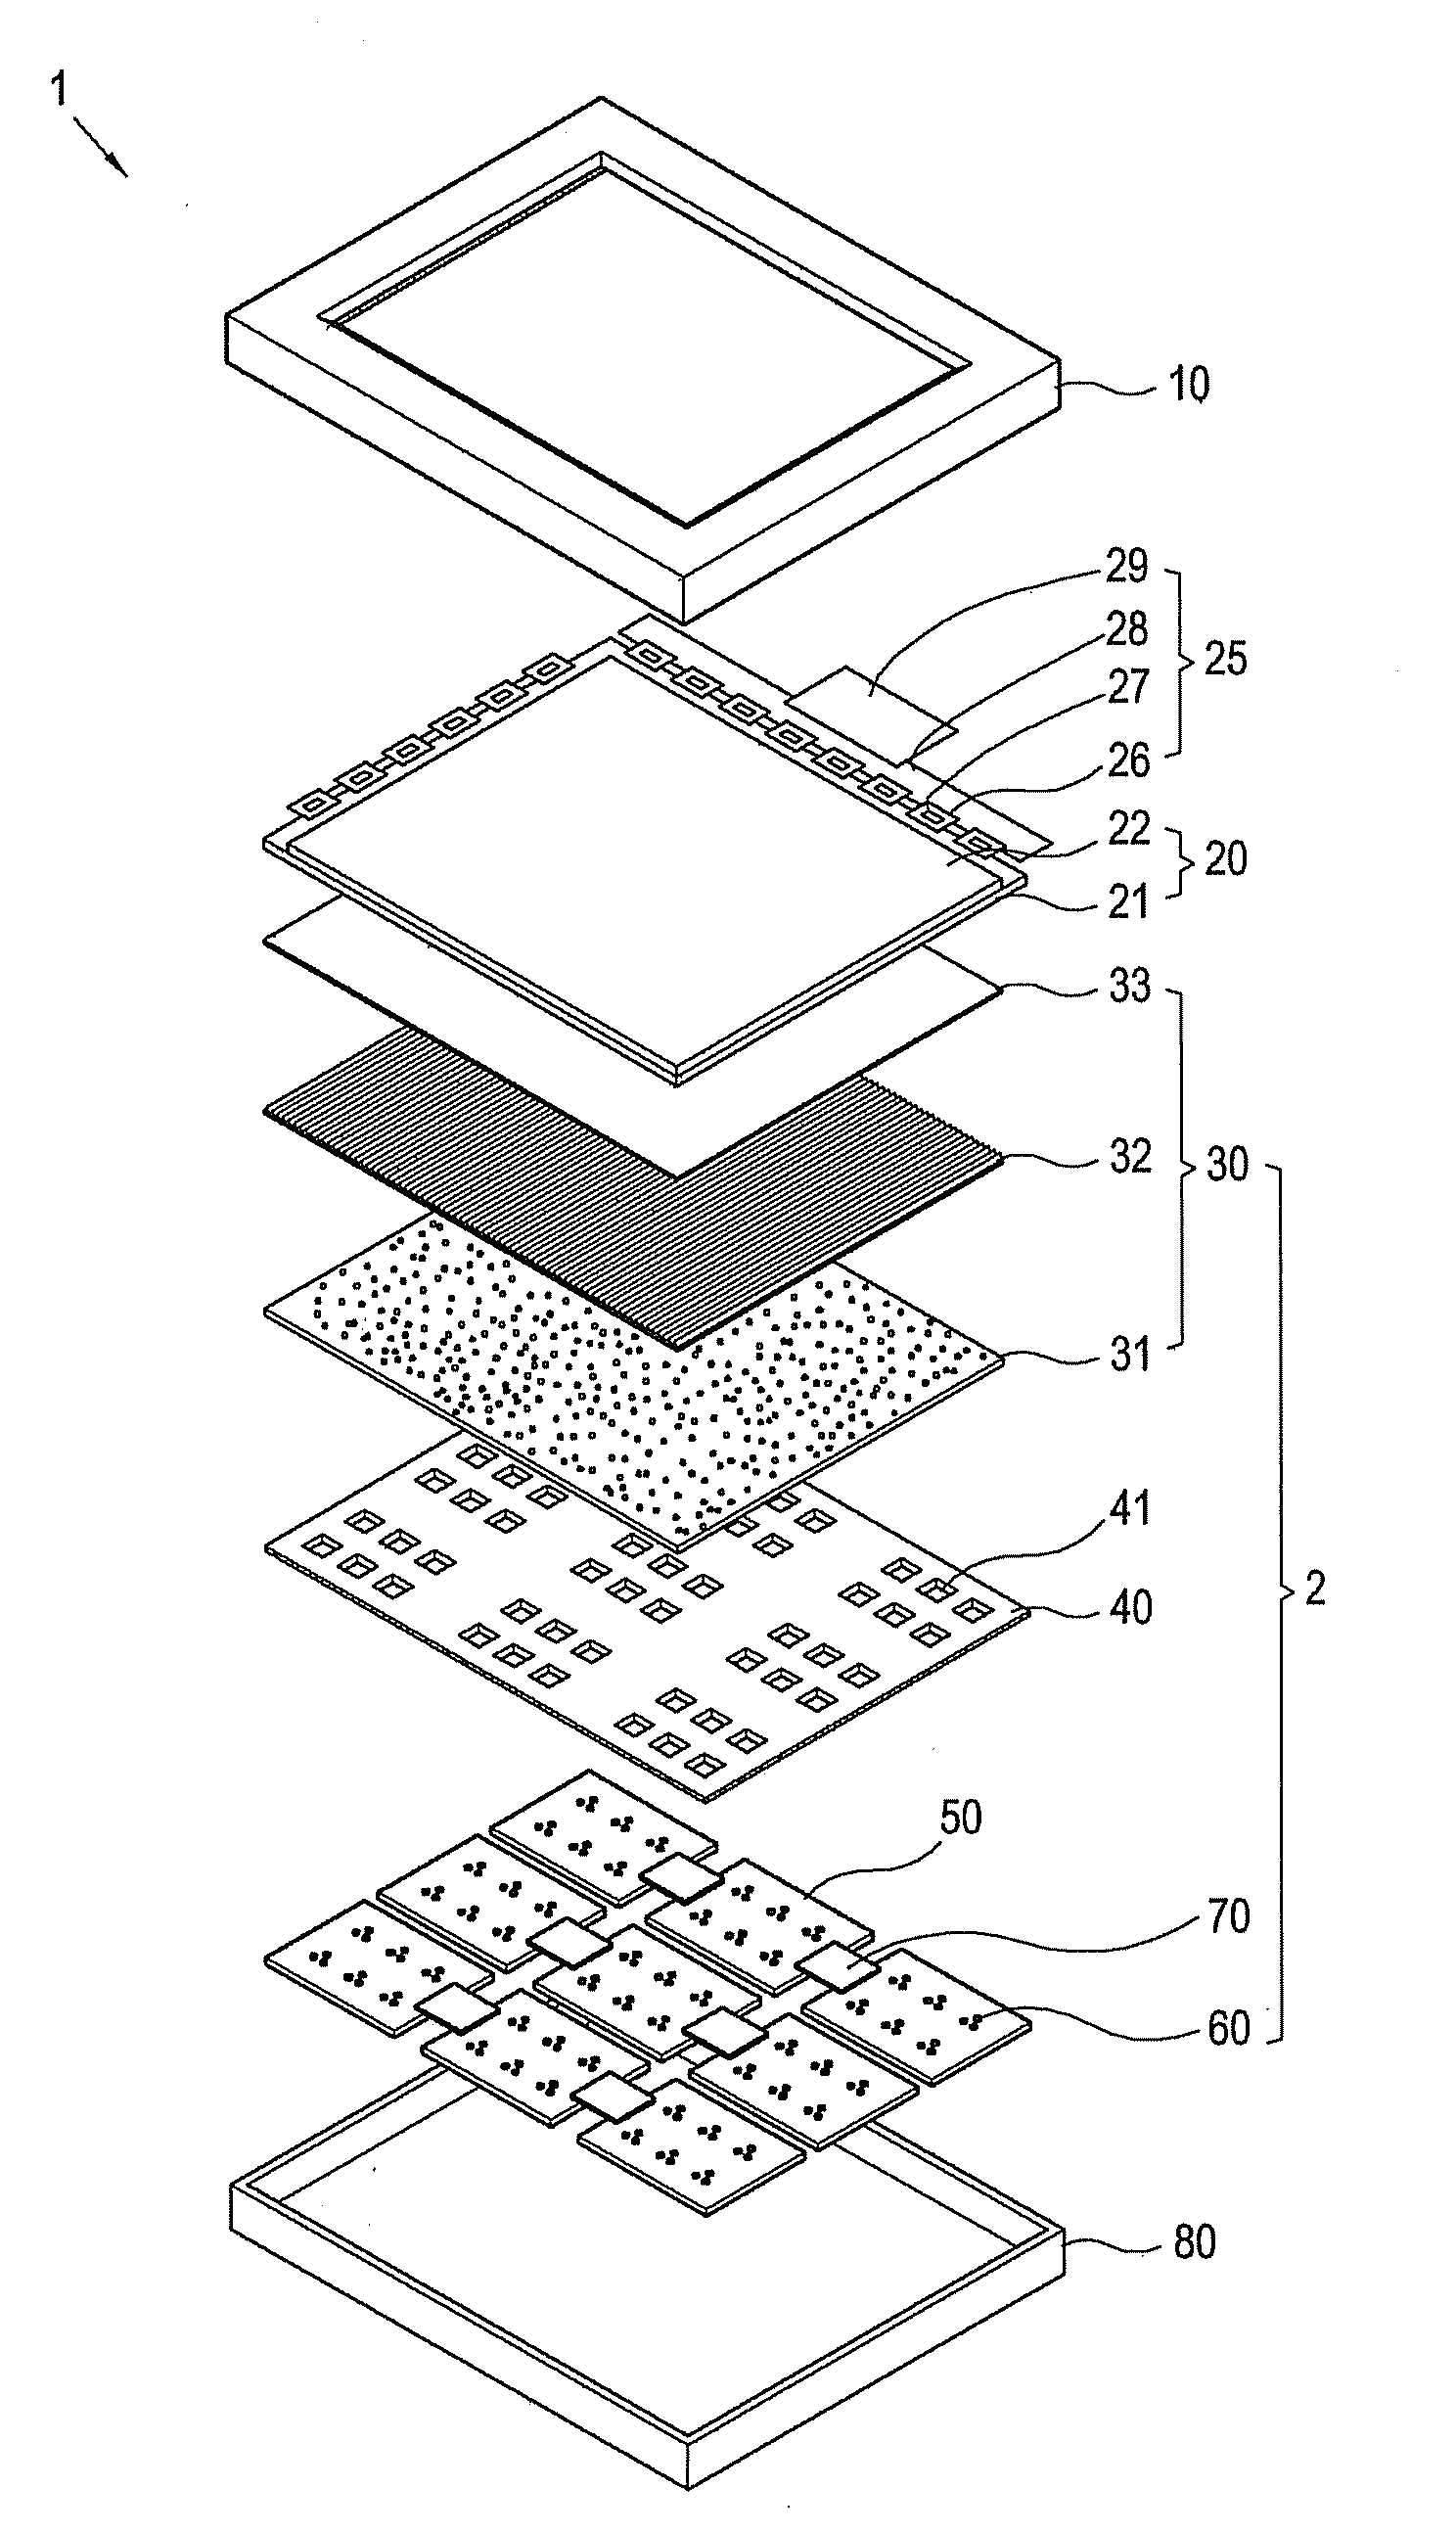 Backlight assembly, manufacturing method thereof, and liquid crystal display device